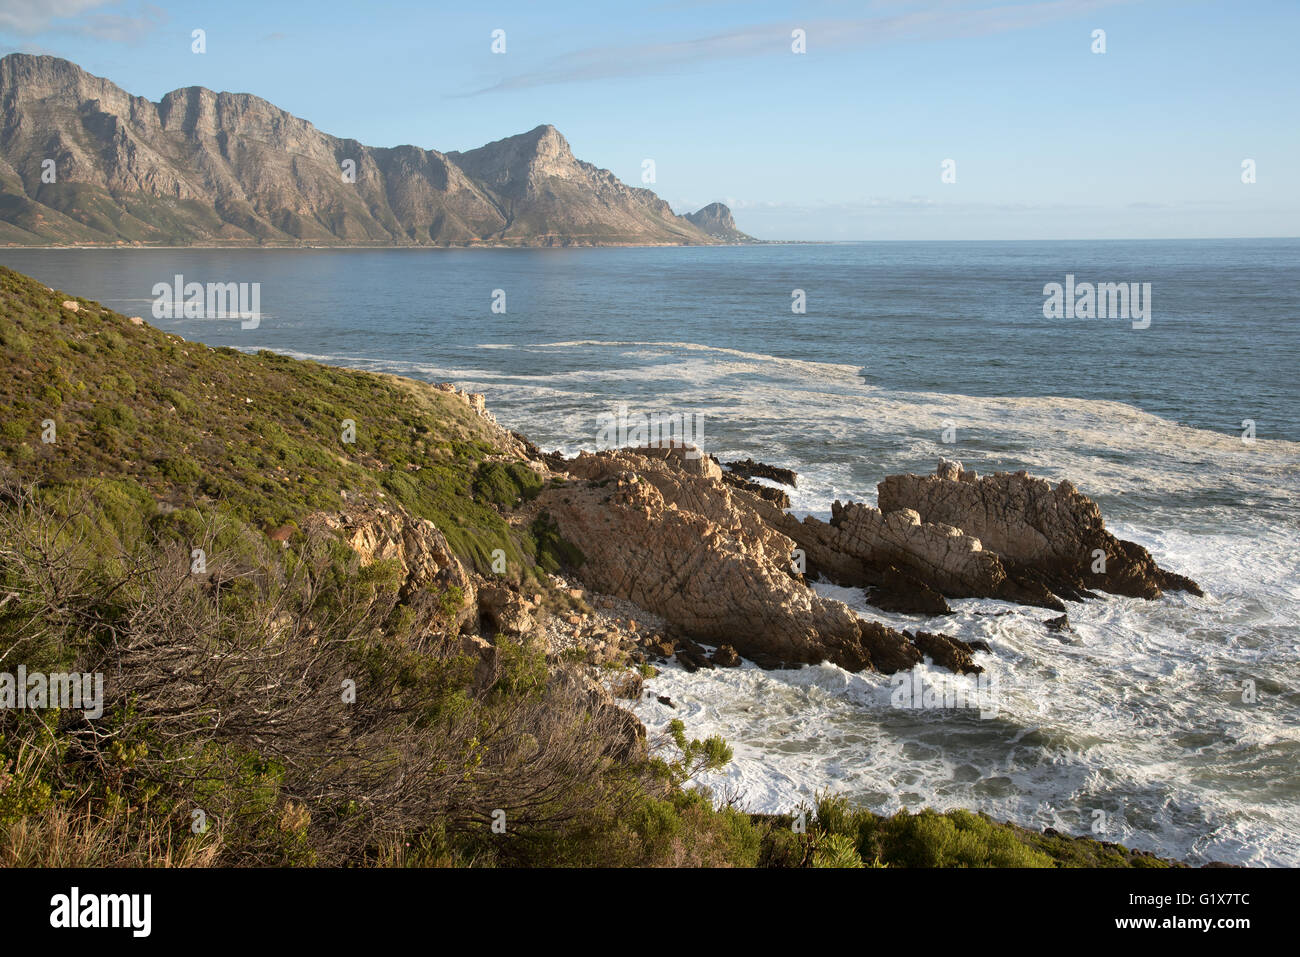 The coastal landscape at Kogel Bay and looking towards Rooi Els in the Western Cape South Africa Stock Photo